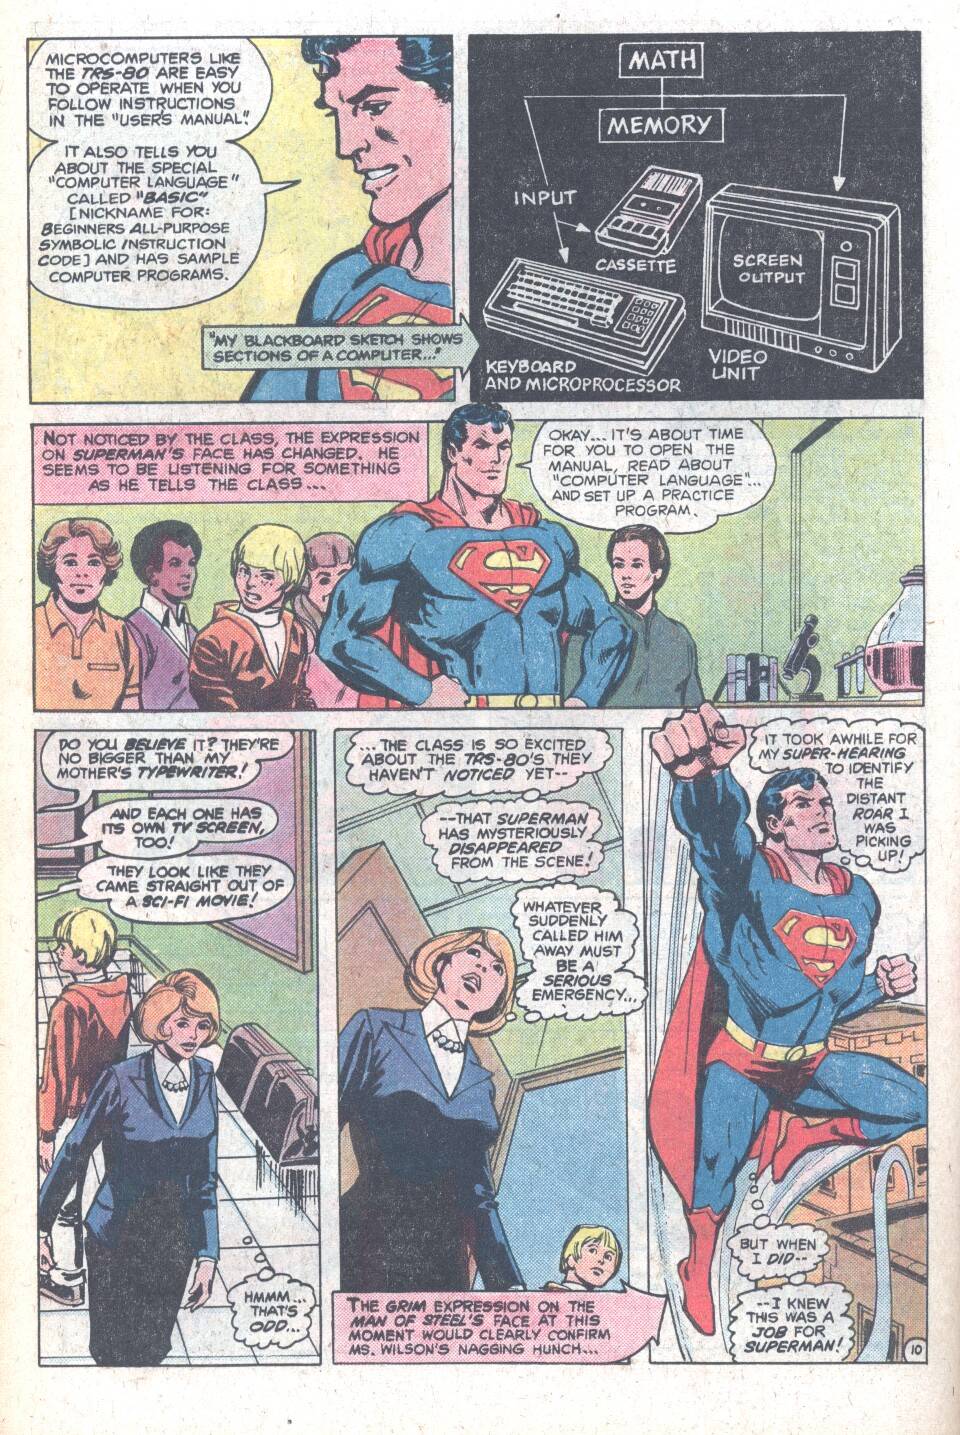 The New Adventures of Superboy 7 Page 21